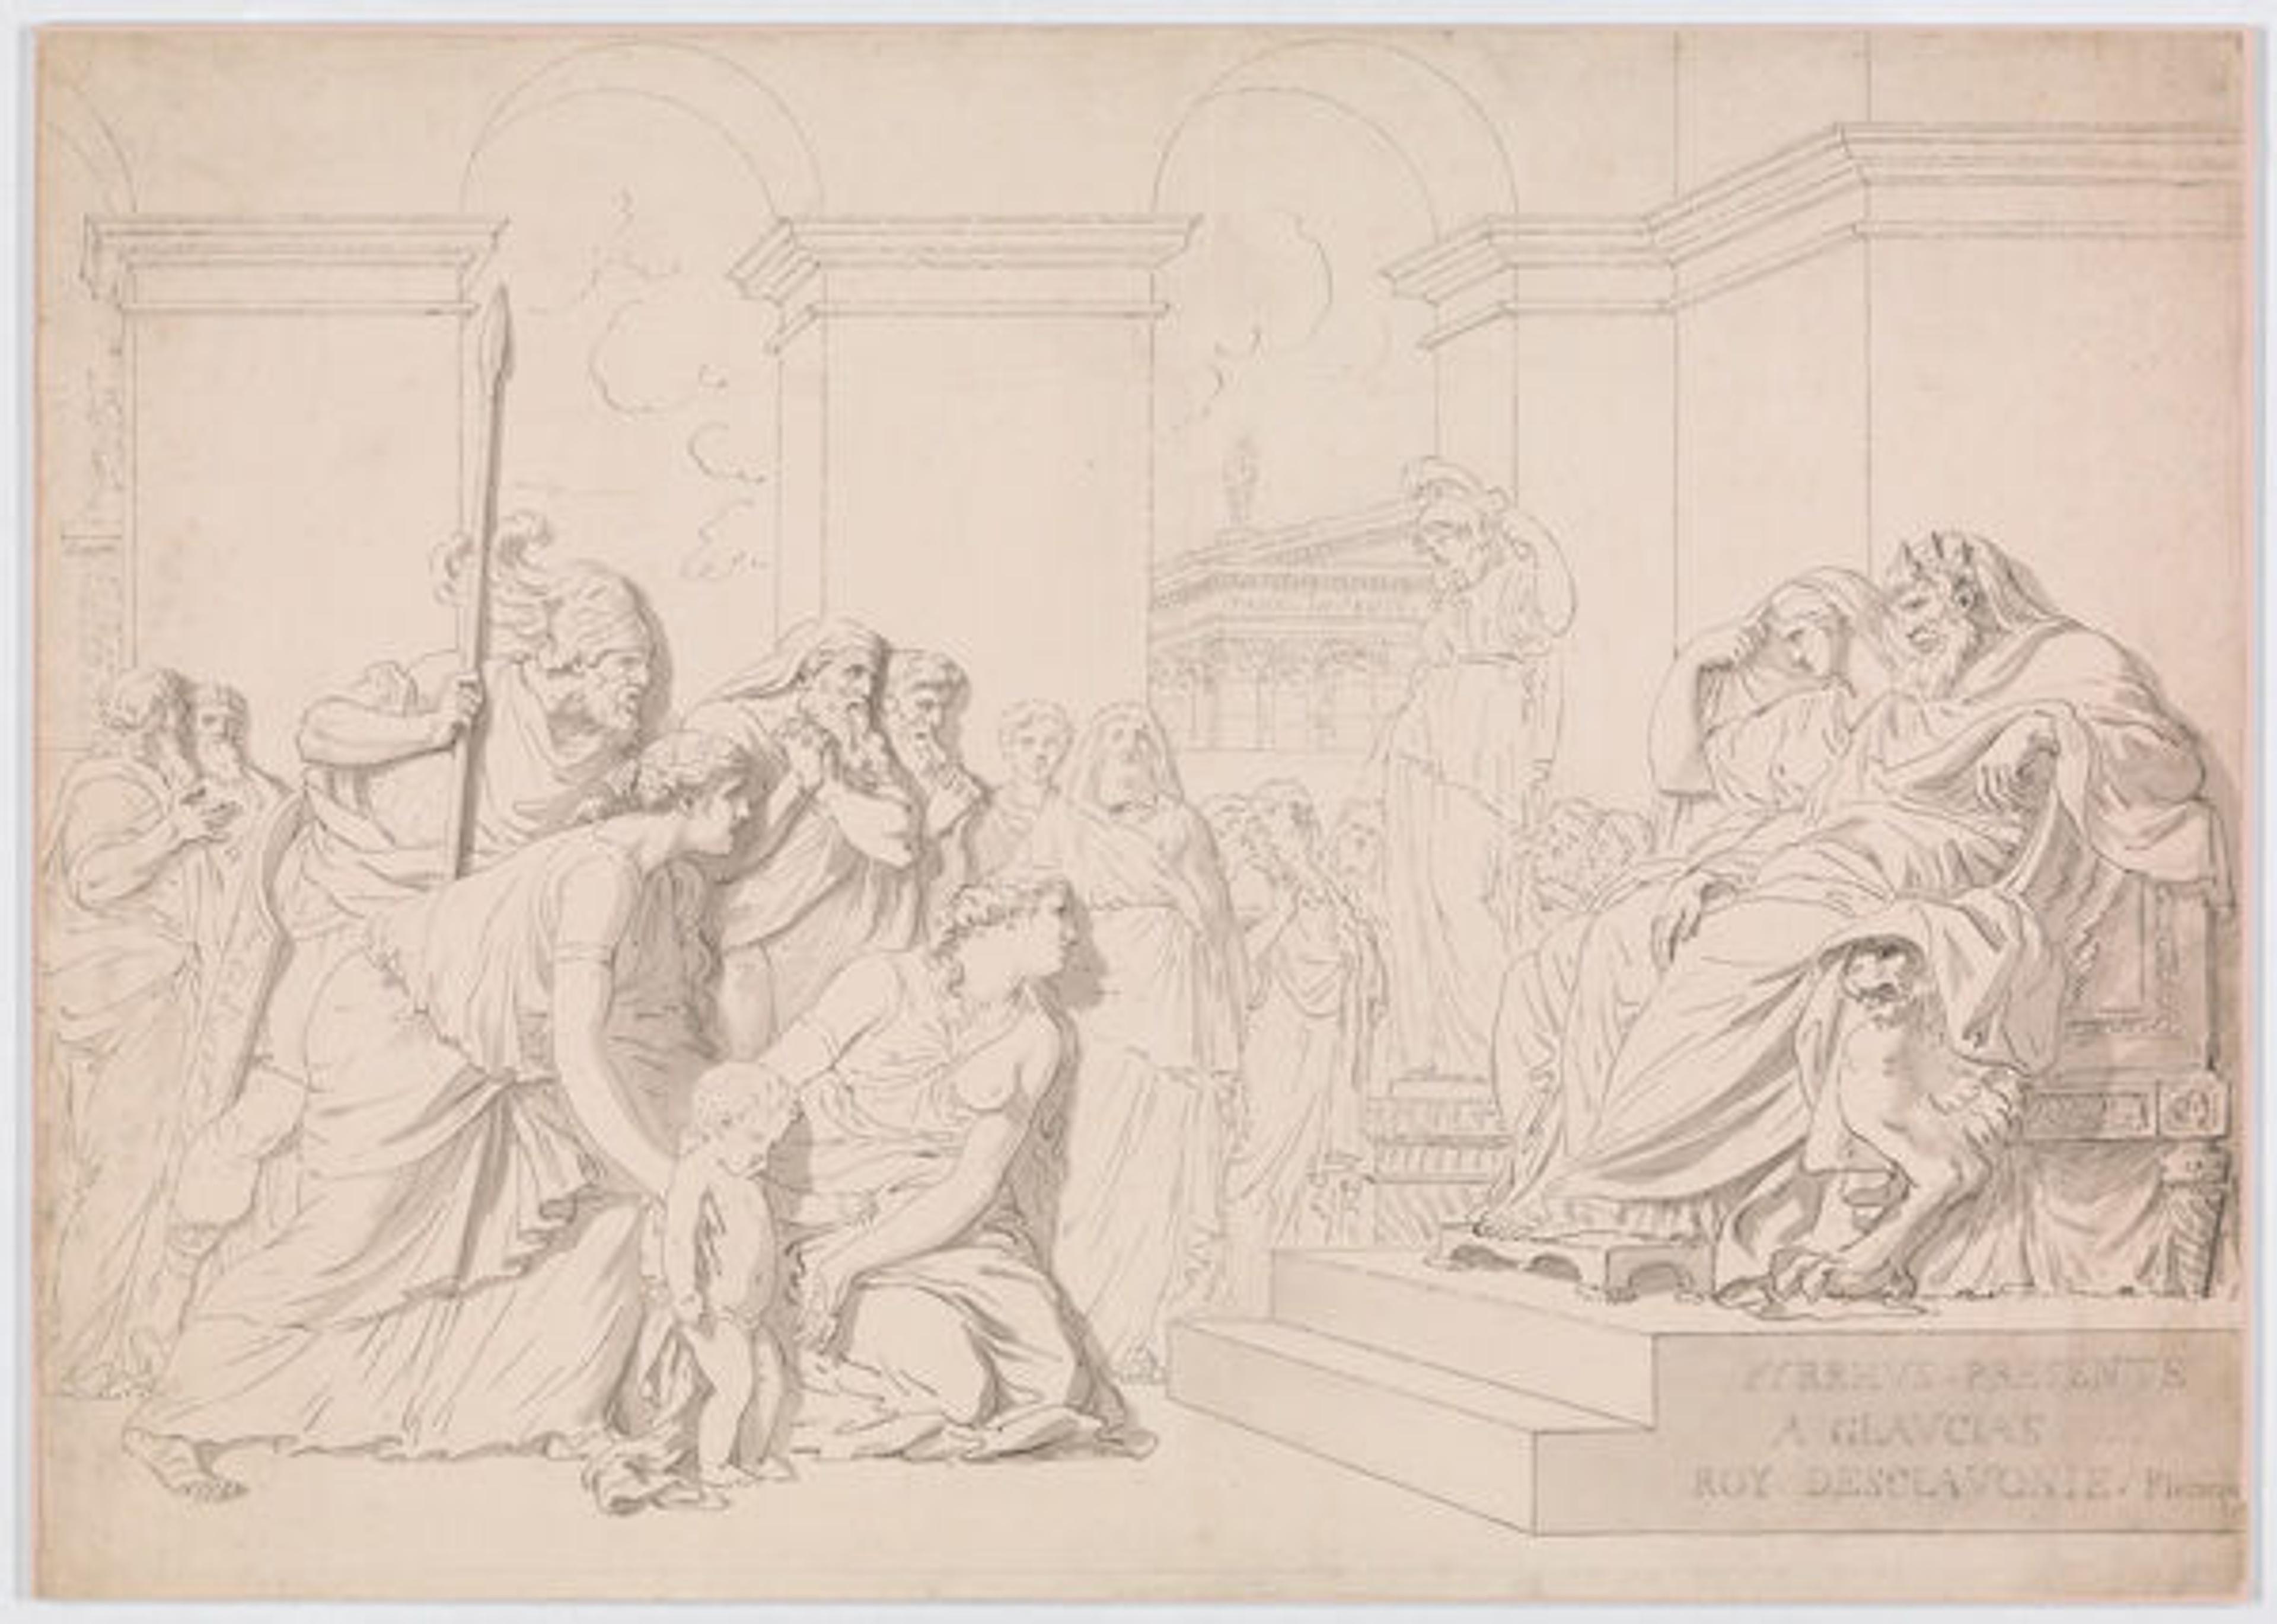 Augustin Pajou (French, 1730–1809). Pyrrhus in the House of Glaucias, late 18th century. Black chalk, pen and gray ink, gray wash on two joined sheets; Sheet: 22 5/16 x 31 5/16 in. (56.7 x 79.5 cm). The Metropolitan Museum of Art, New York, Harry G. Sperling Fund, 2014 (2014.439)